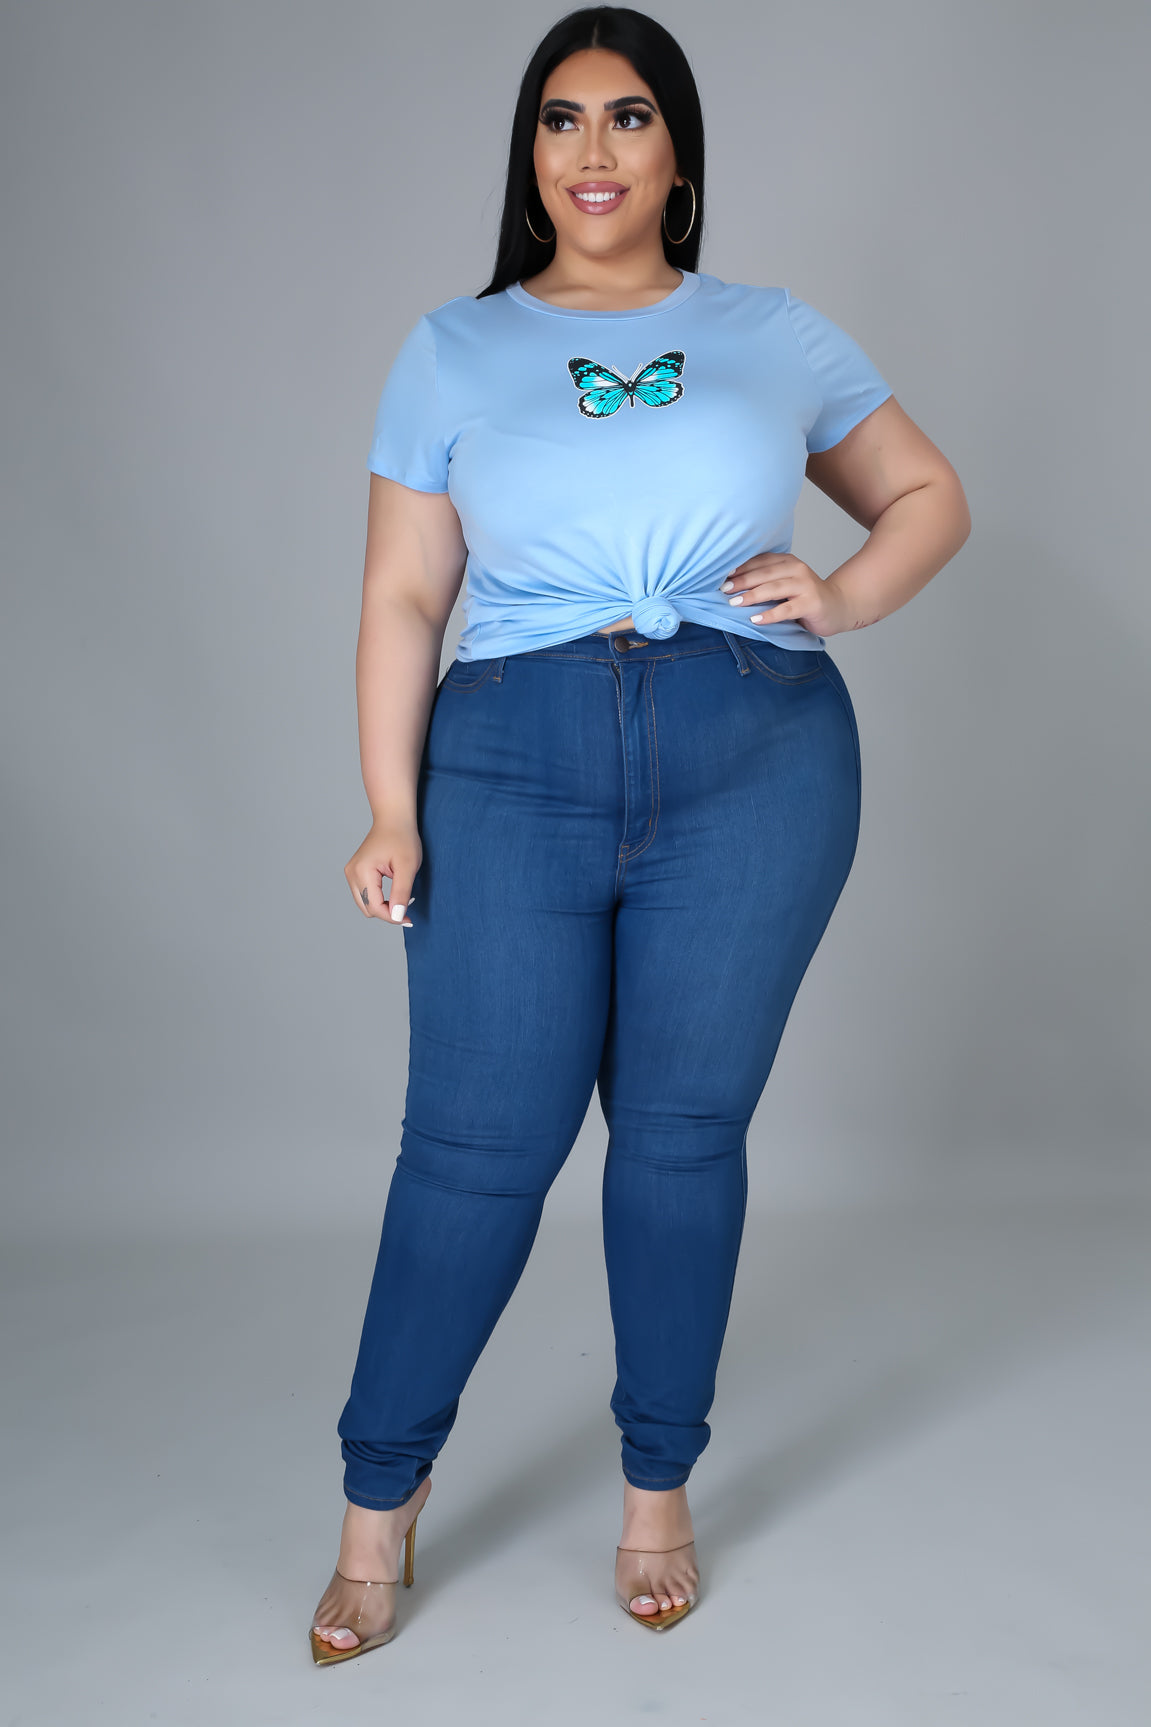 Baby Blue Dreaming Top